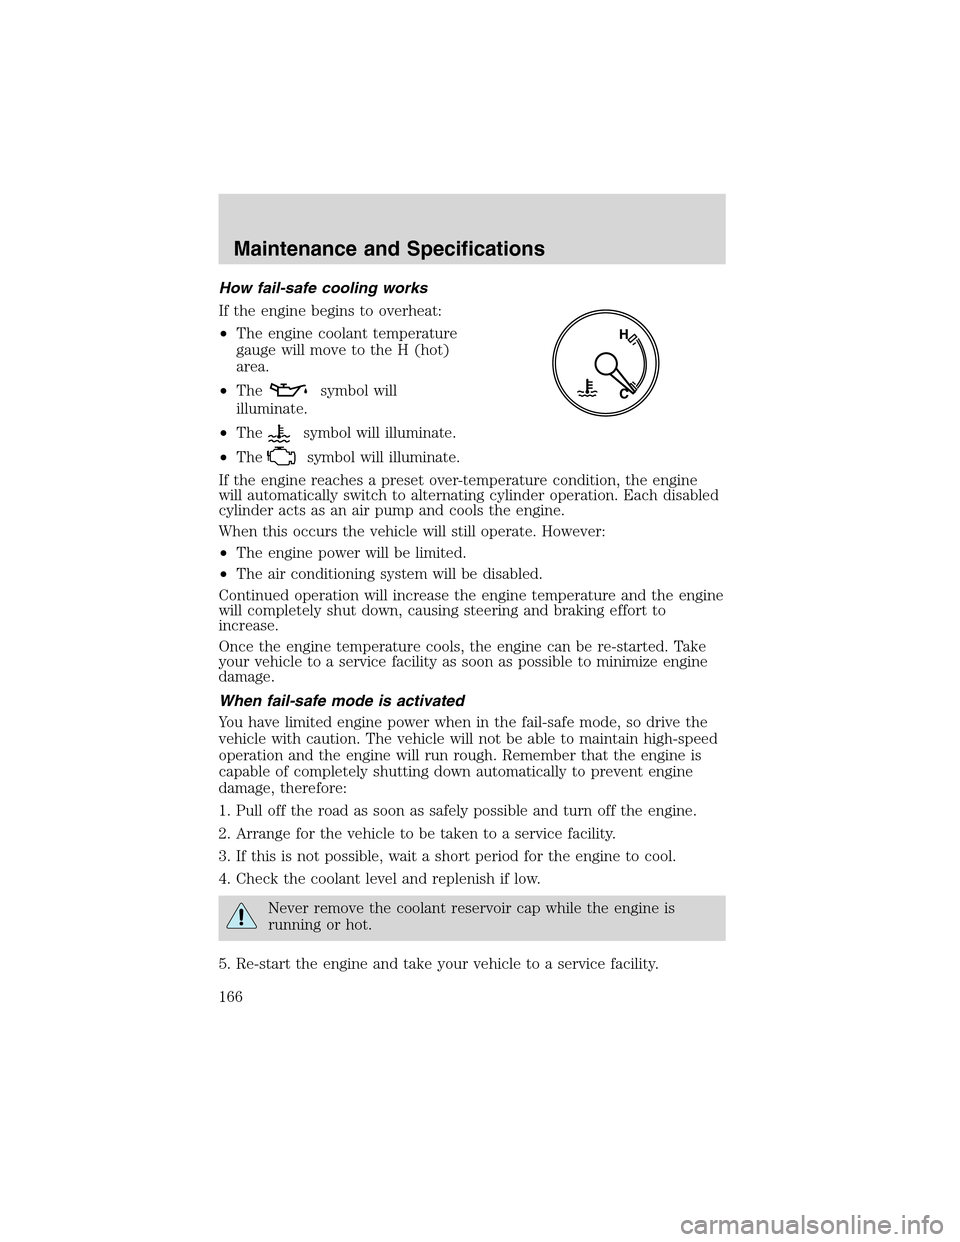 FORD THUNDERBIRD 2003 11.G Service Manual How fail-safe cooling works
If the engine begins to overheat:
•The engine coolant temperature
gauge will move to the H (hot)
area.
•The
symbol will
illuminate.
•The
symbol will illuminate.
•Th